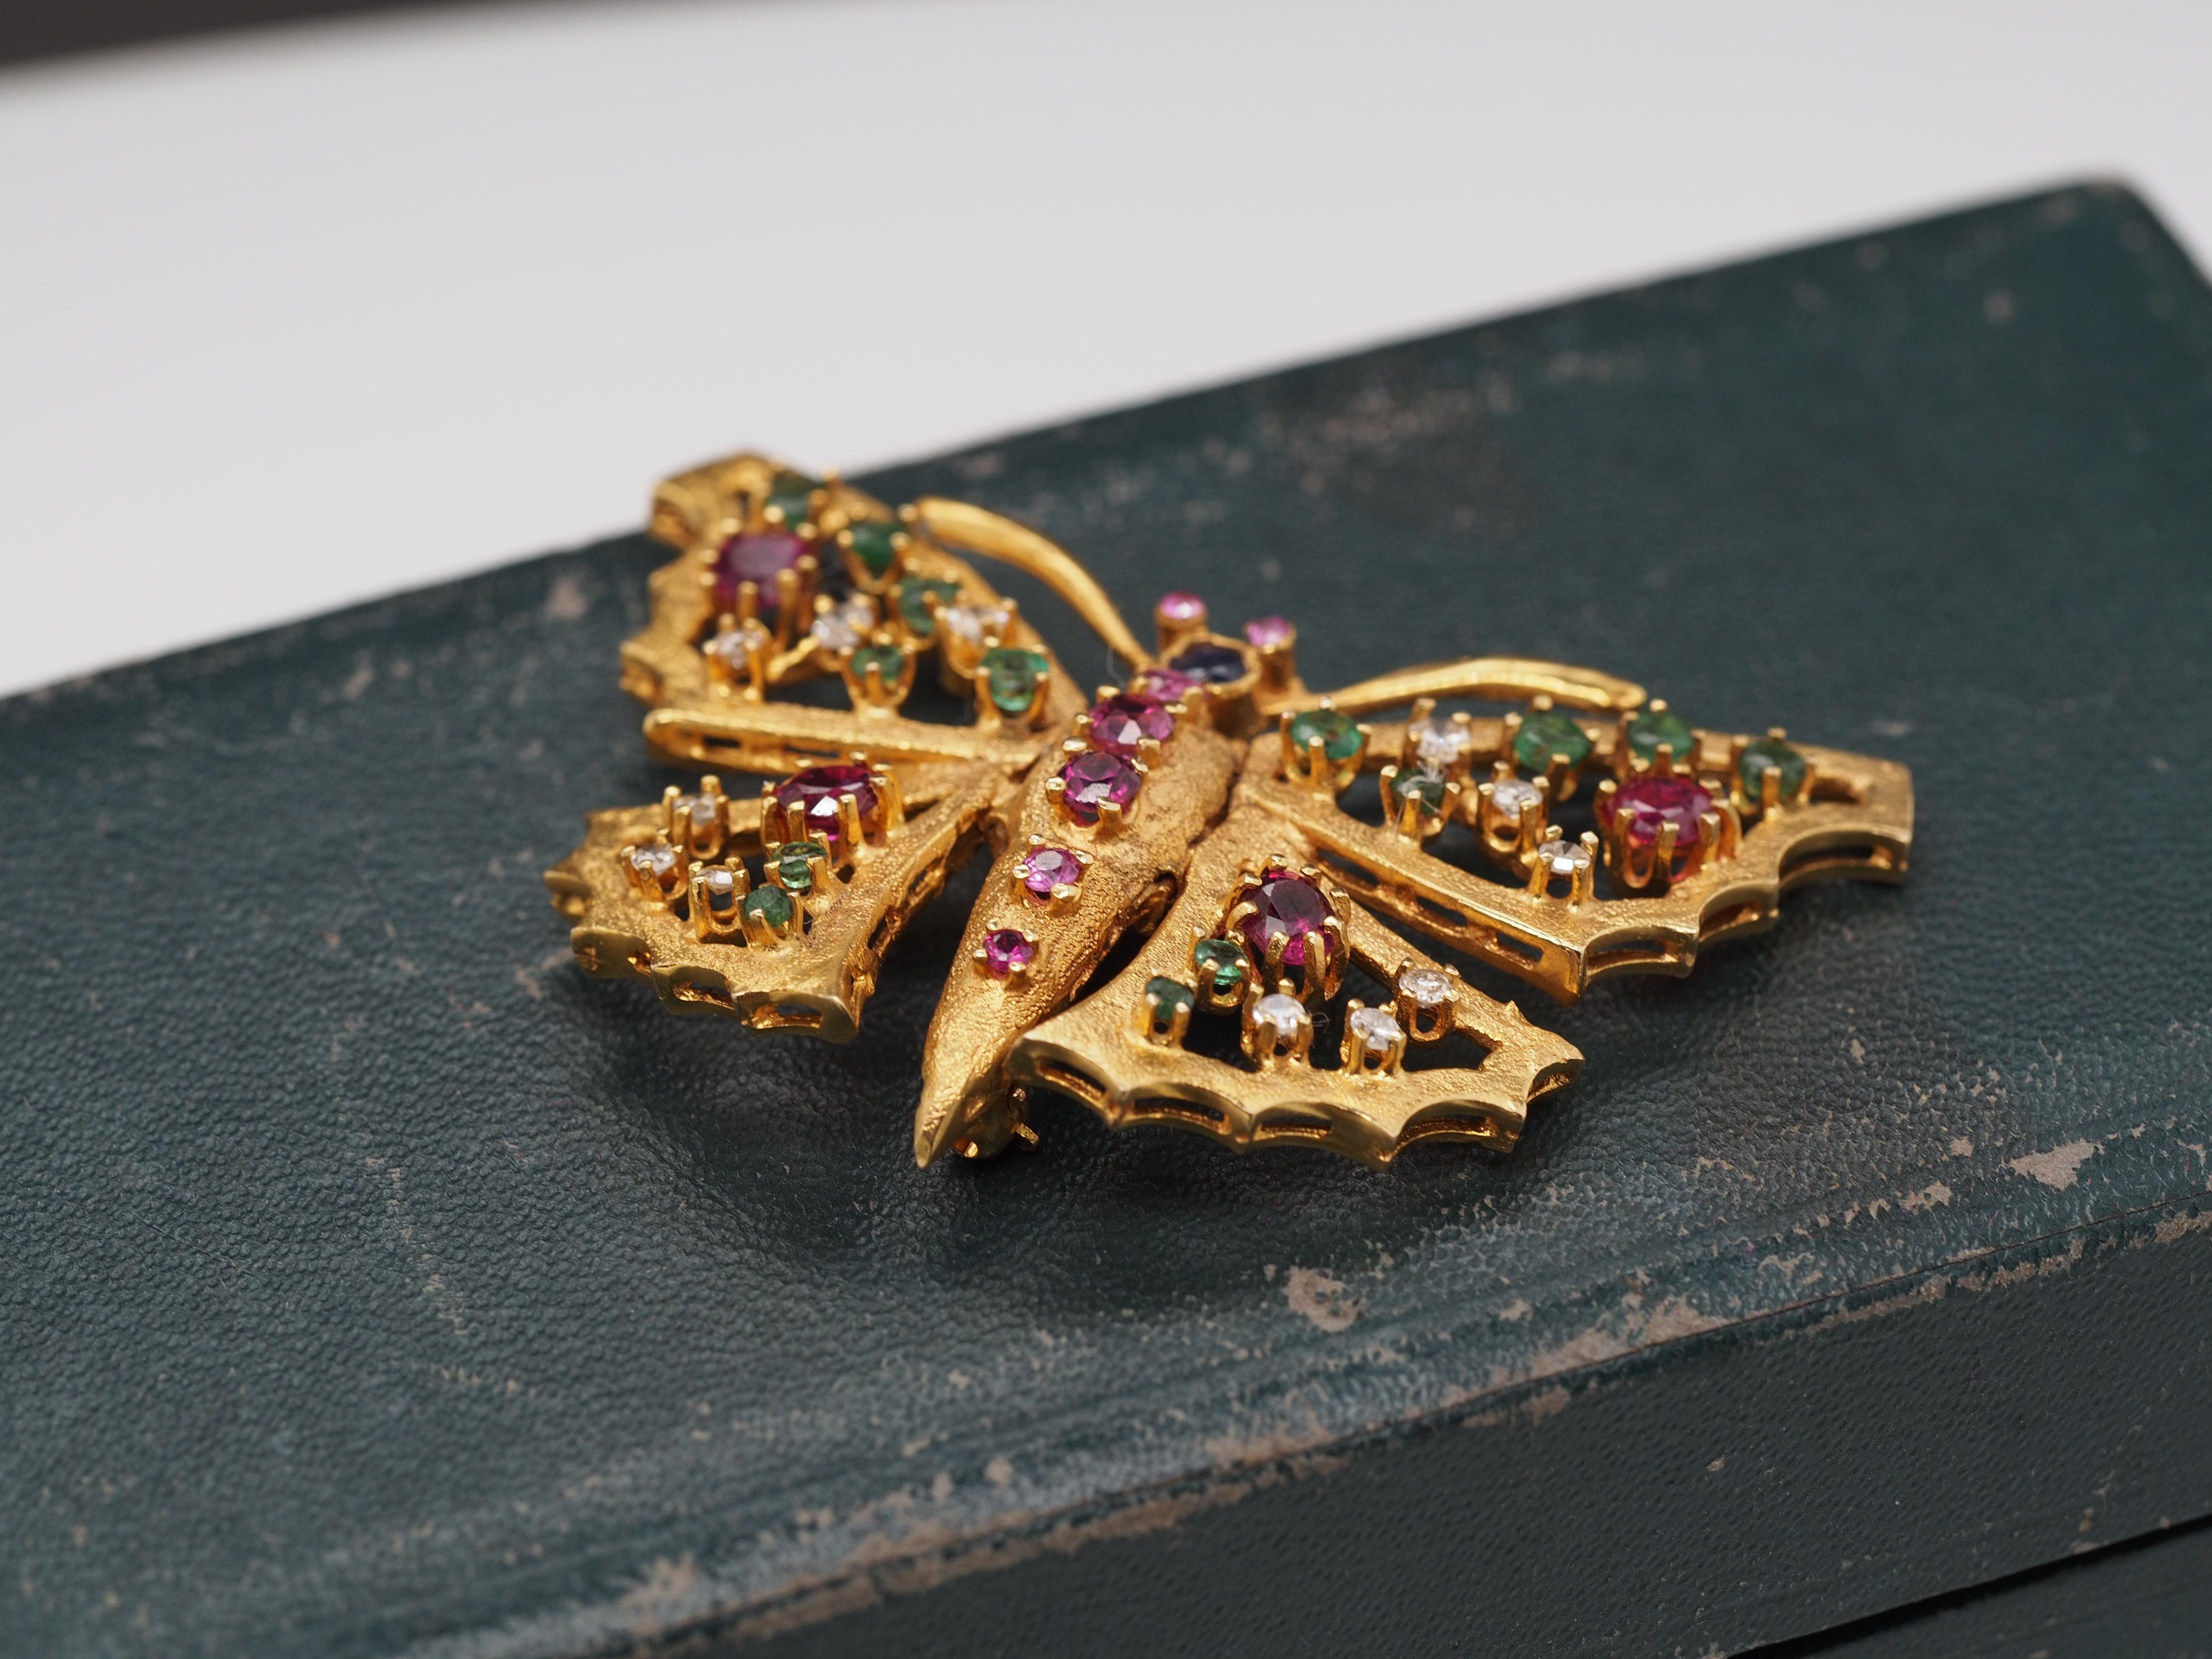 14K Yellow Gold Butterfly Brooch with Hinged Wings and Diamonds, Rubies, Emerald For Sale 3